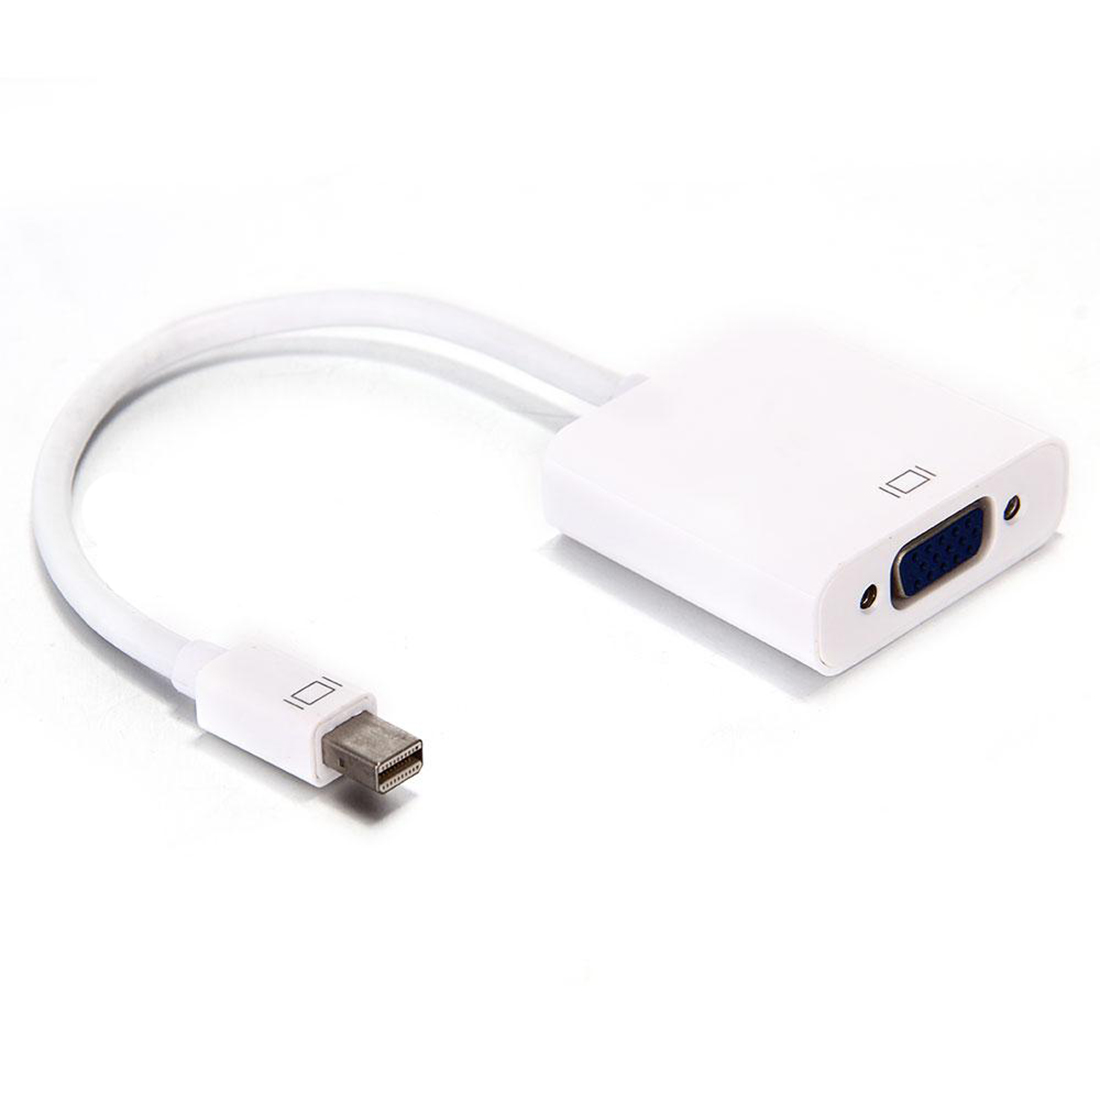 1pc Mini Display Port DP to VGA Cable Conversion Cable Useful For Apple IMac Mac